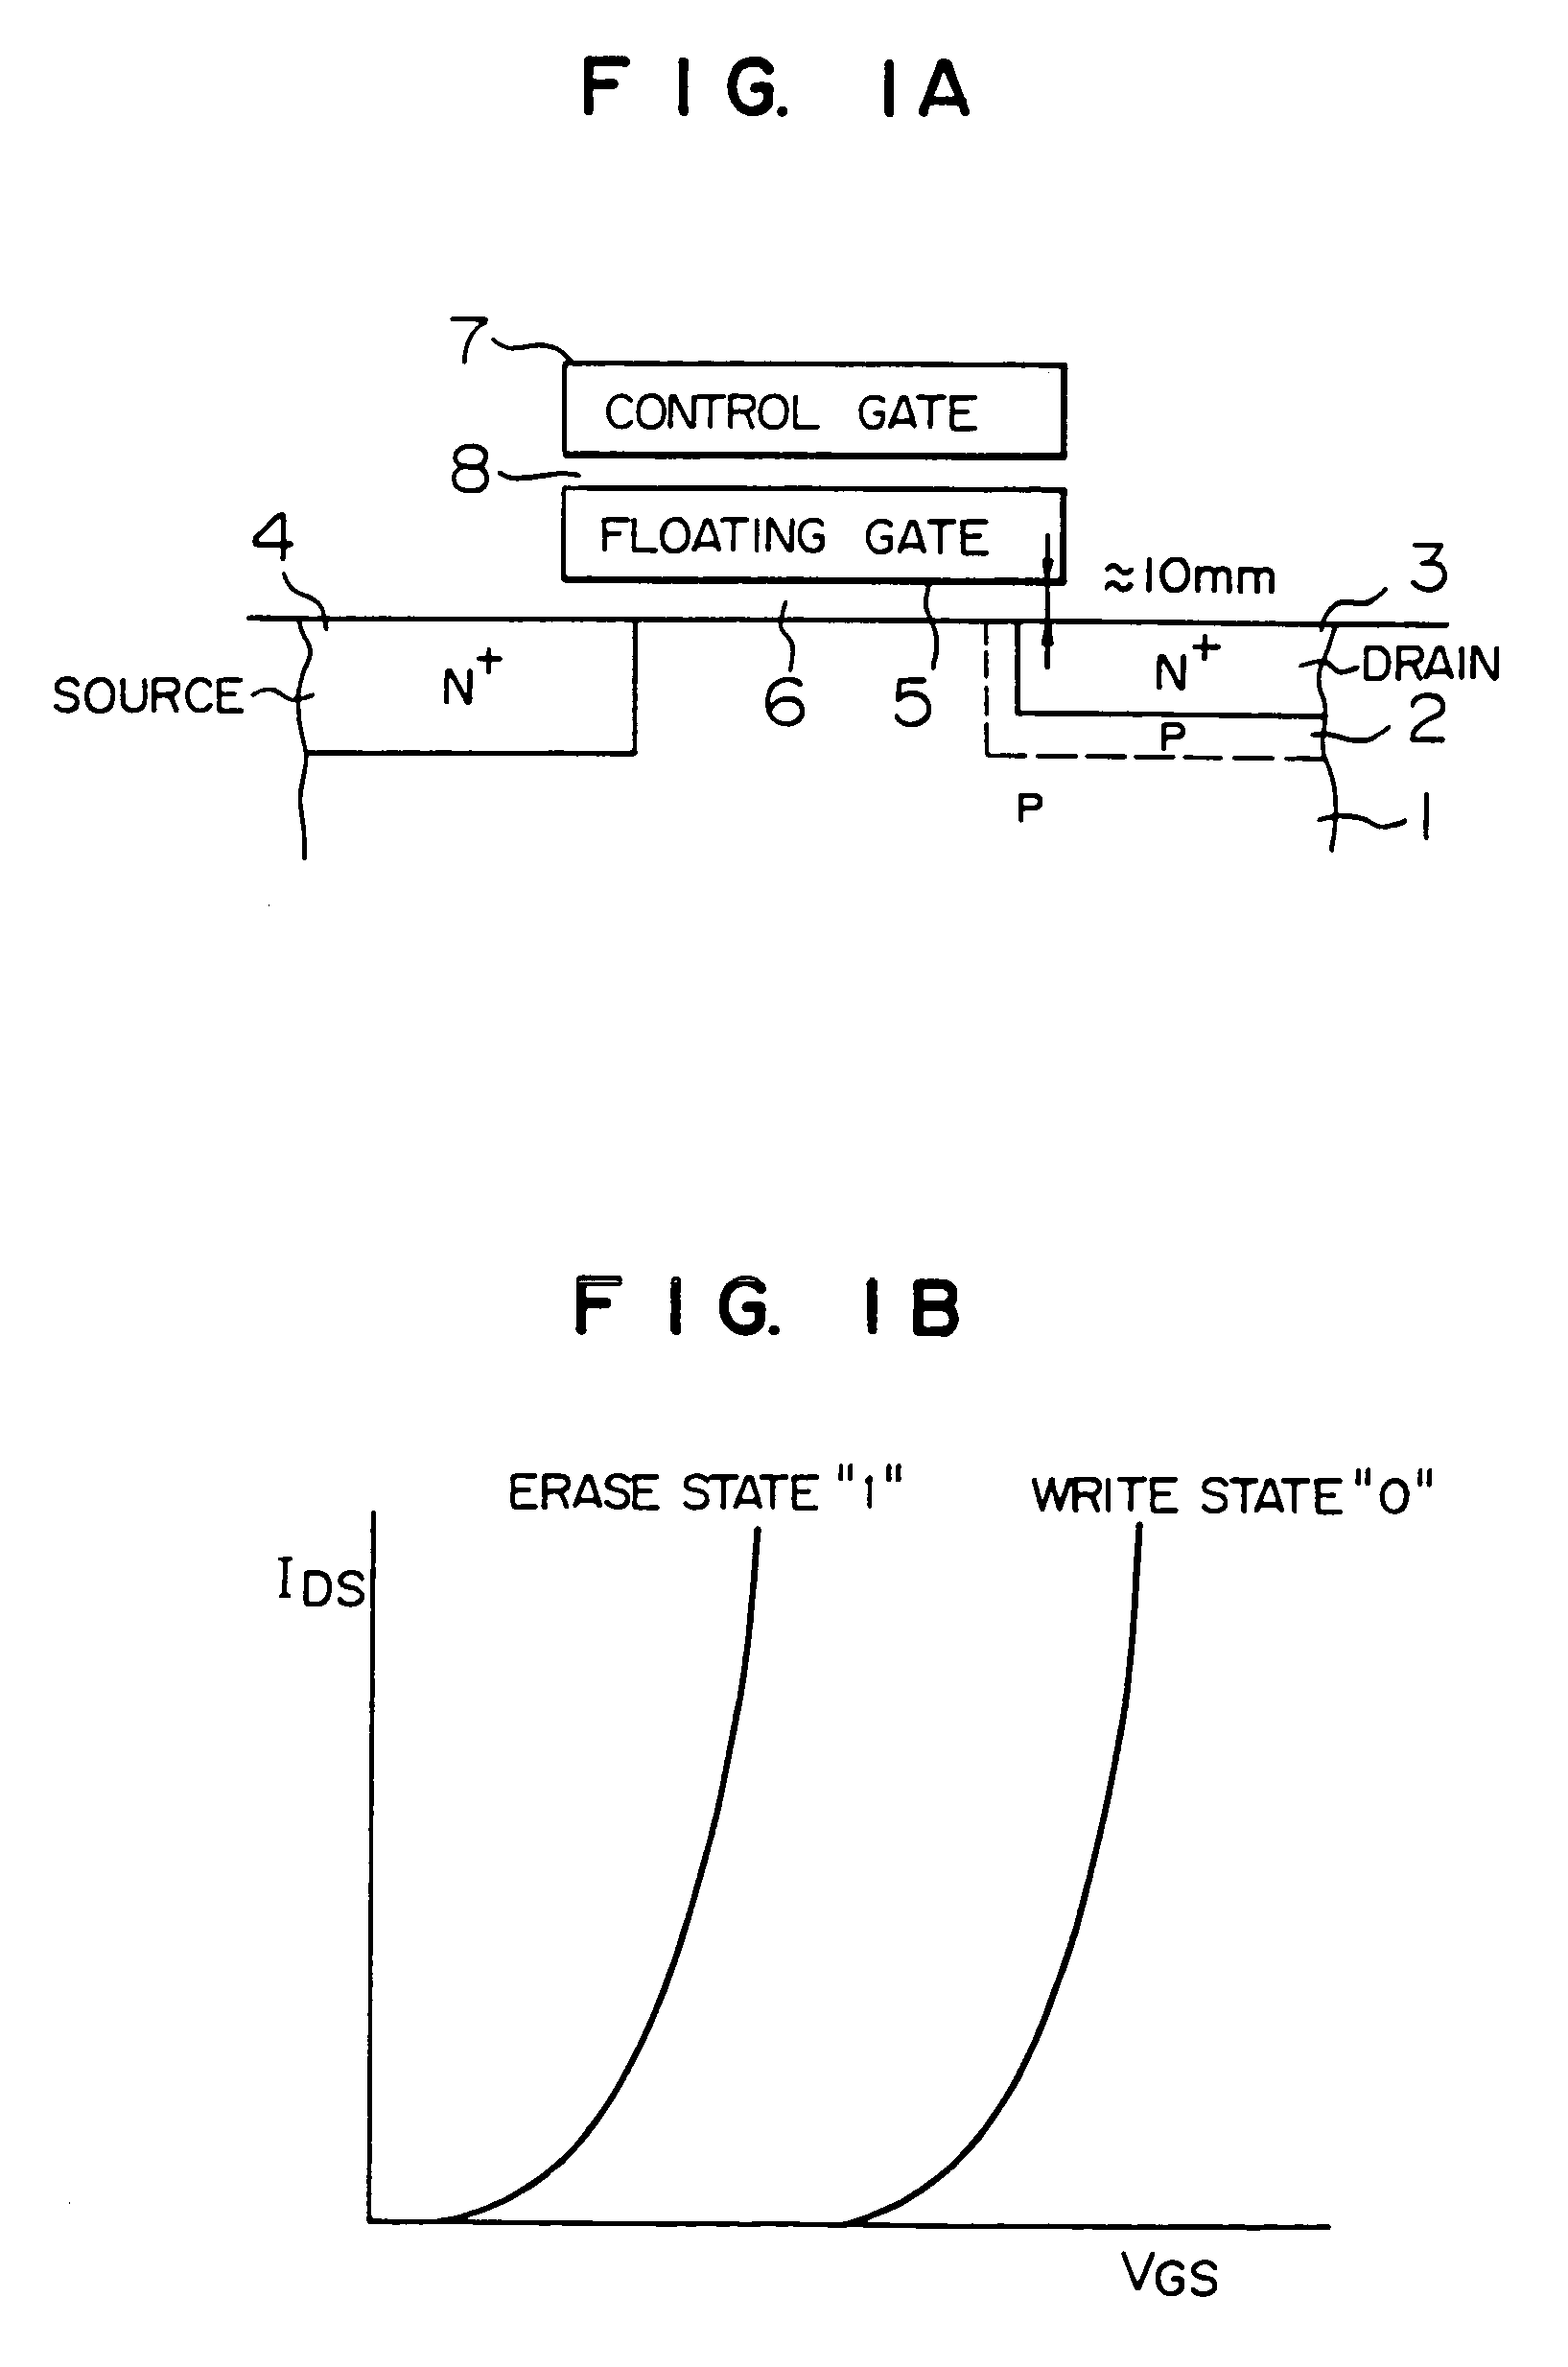 Data processing apparatus having a flash memory built-in which is rewritable by use of external device